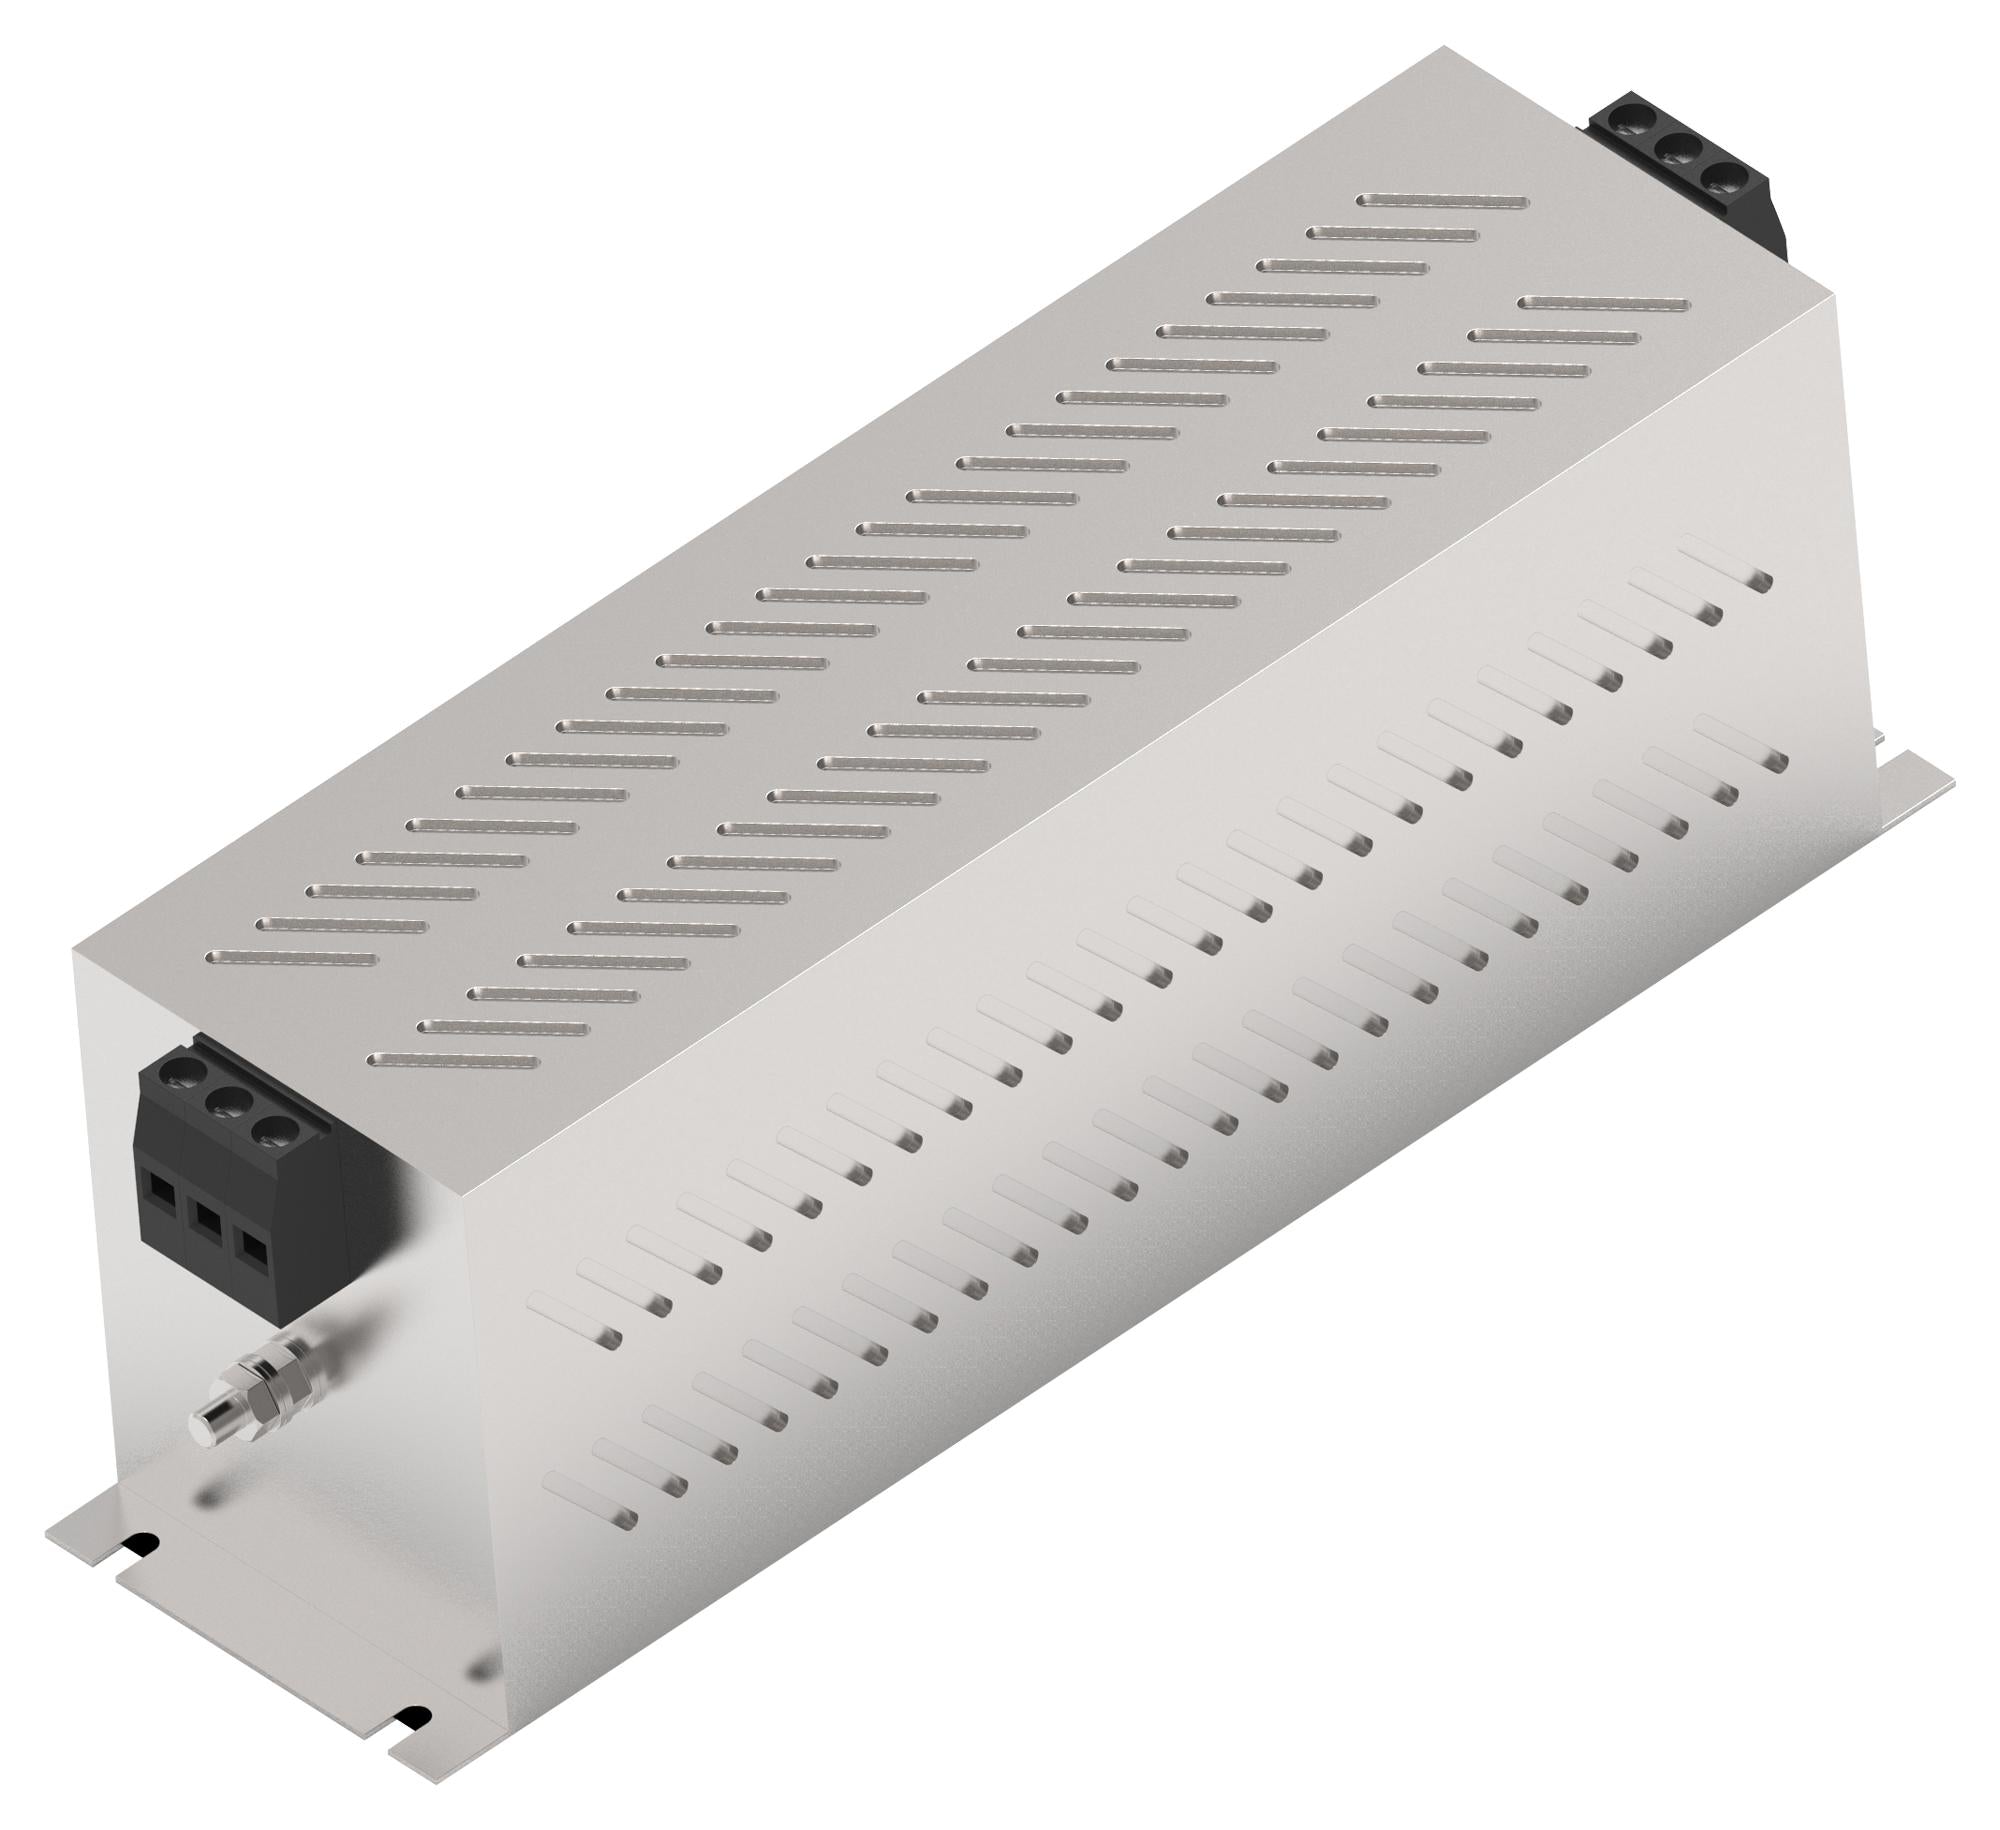 55KEHD10ABSD POWER LINE FILTER, 3 PHASE, 55A, 440VAC CORCOM - TE CONNECTIVITY